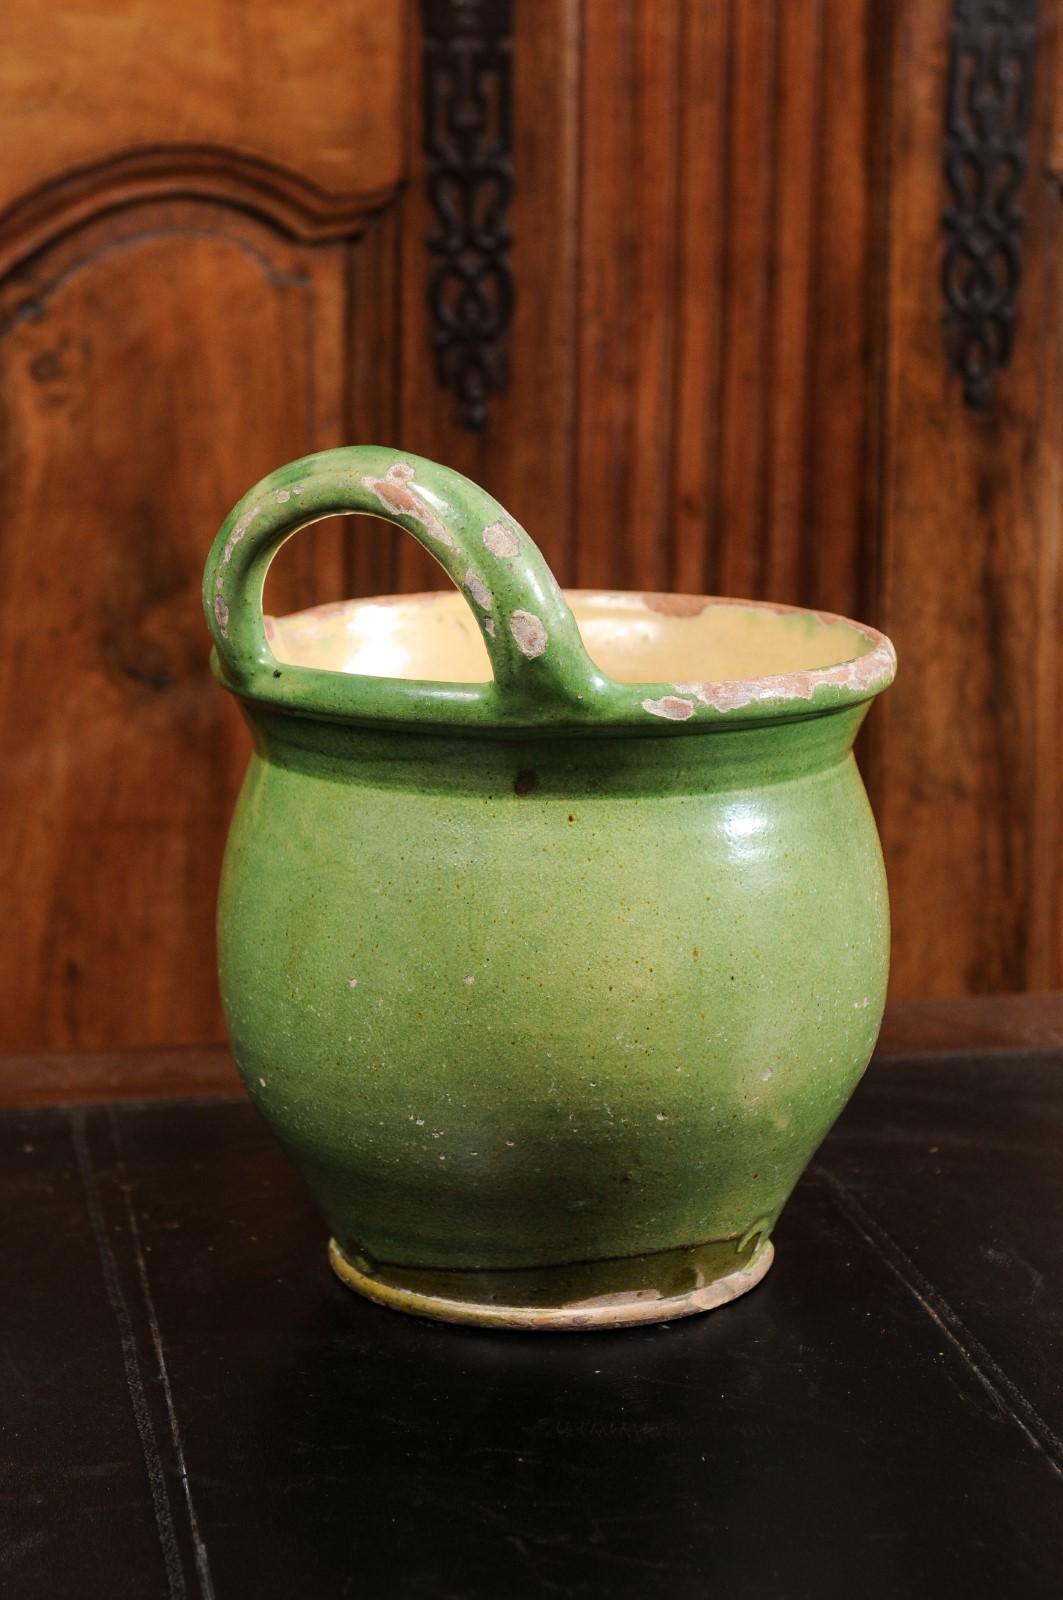 A rustic French Provincial pottery jardinière from the 19th century, with green glaze, back handle and nicely weathered patina. Created in Southern France during the 19th century, this pottery jardinière features a circular bulbous body covered with